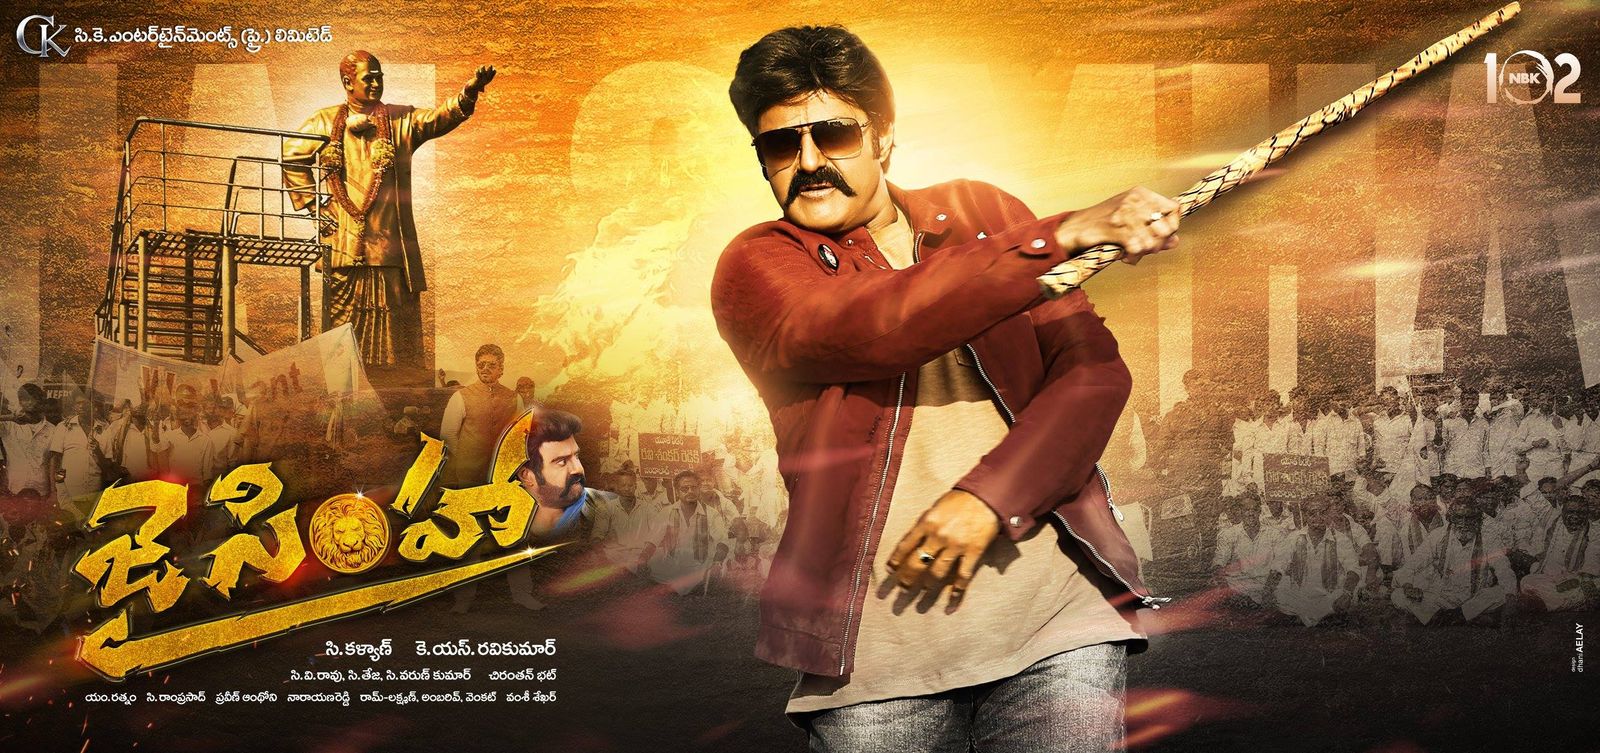 Jai Simha Will Be Mostly Done By December 1st